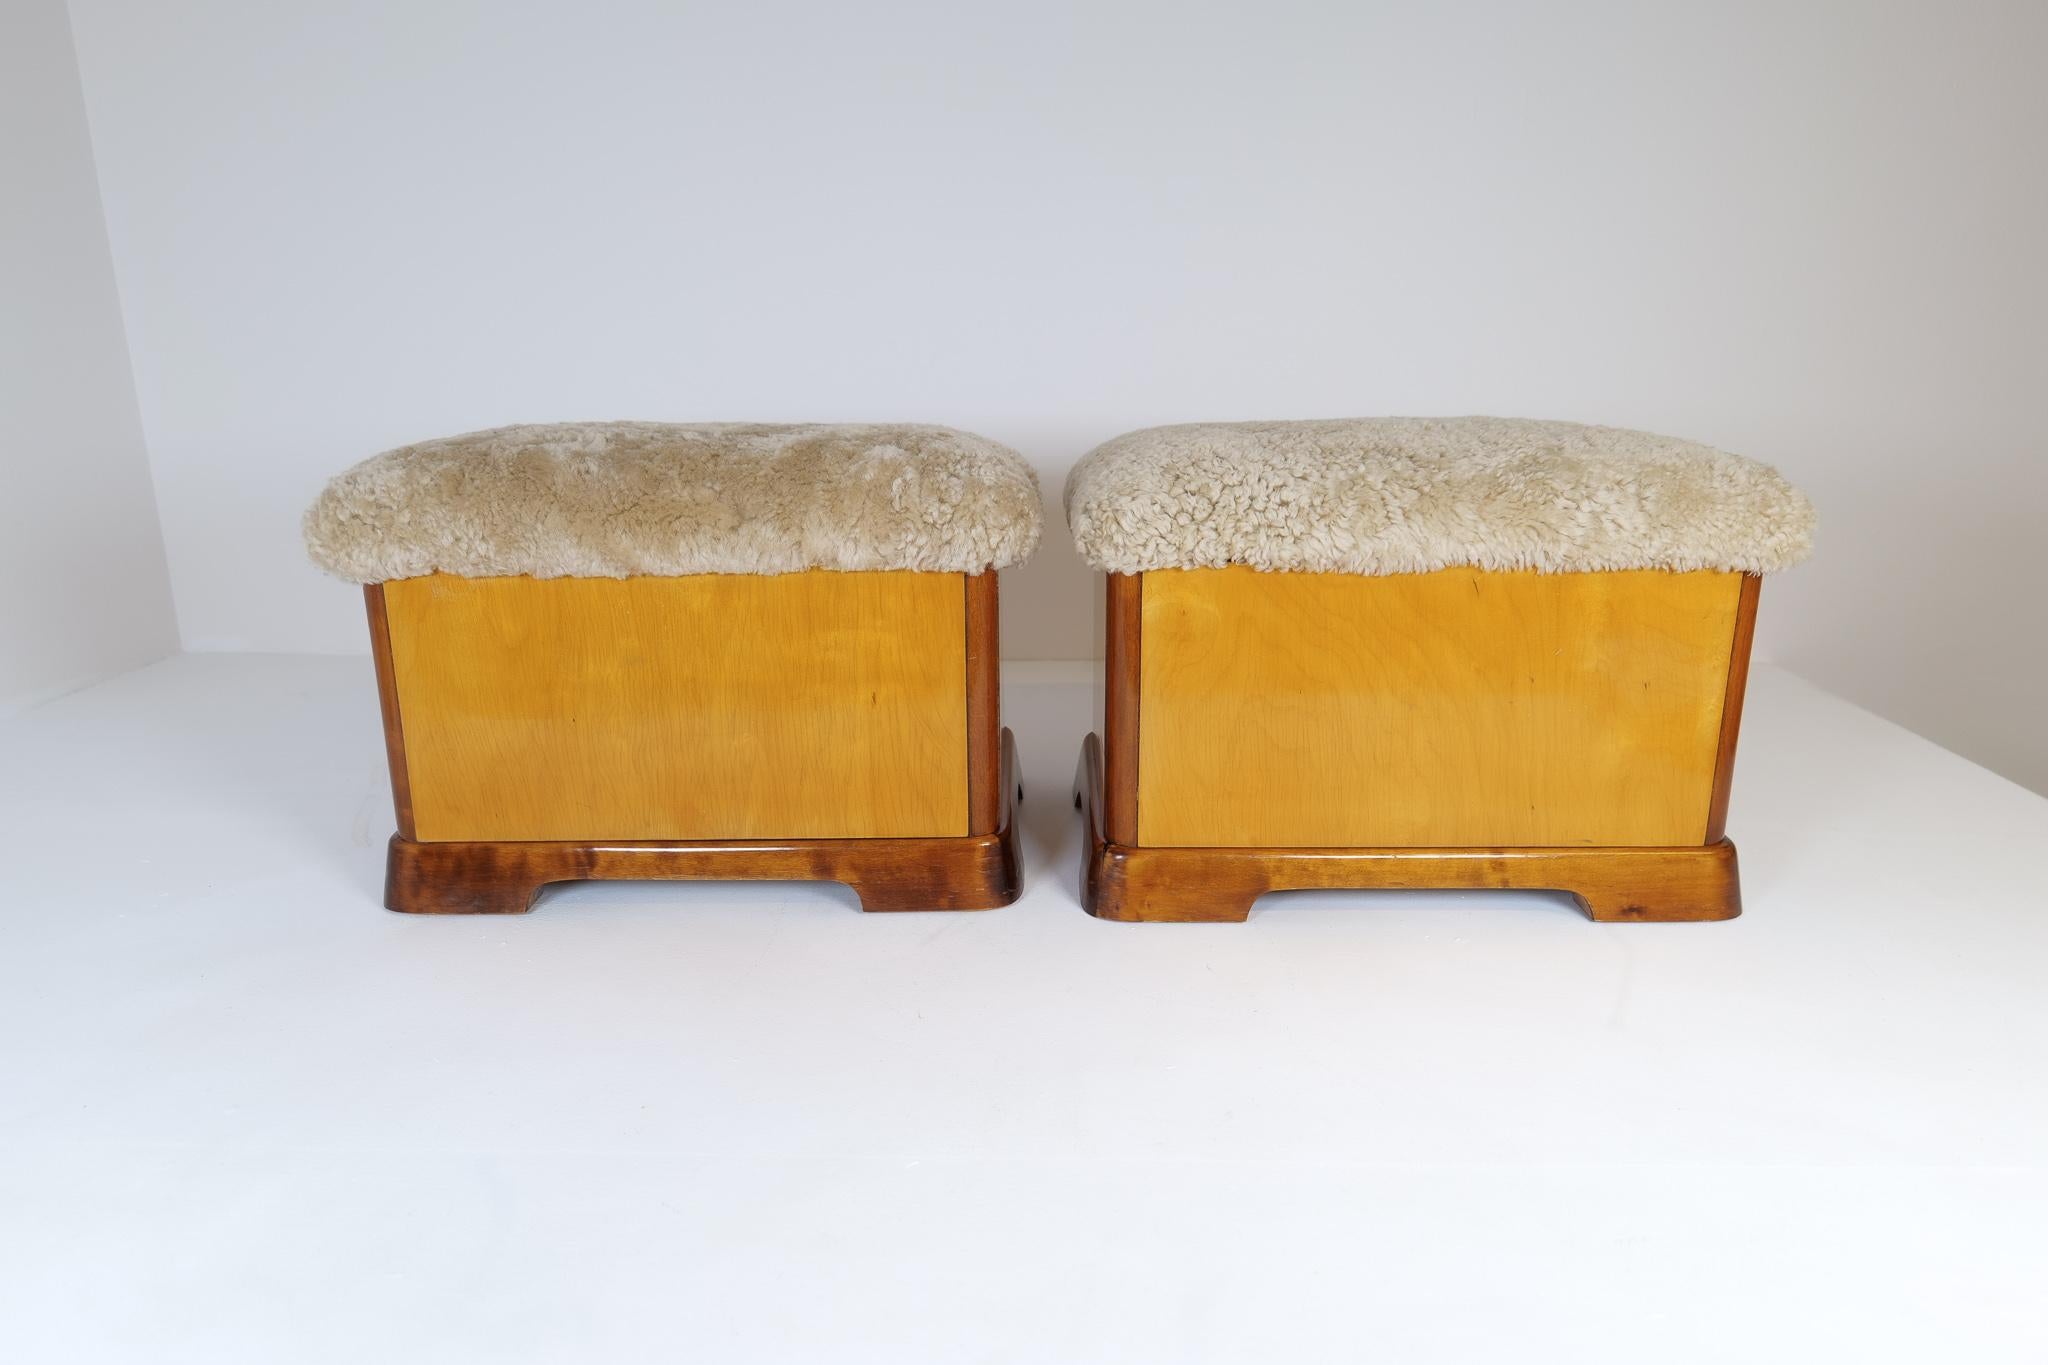 Swedish Art Deco Stools in Lacquered Birch and Sheepskin/Shearling Seat 1940s For Sale 3